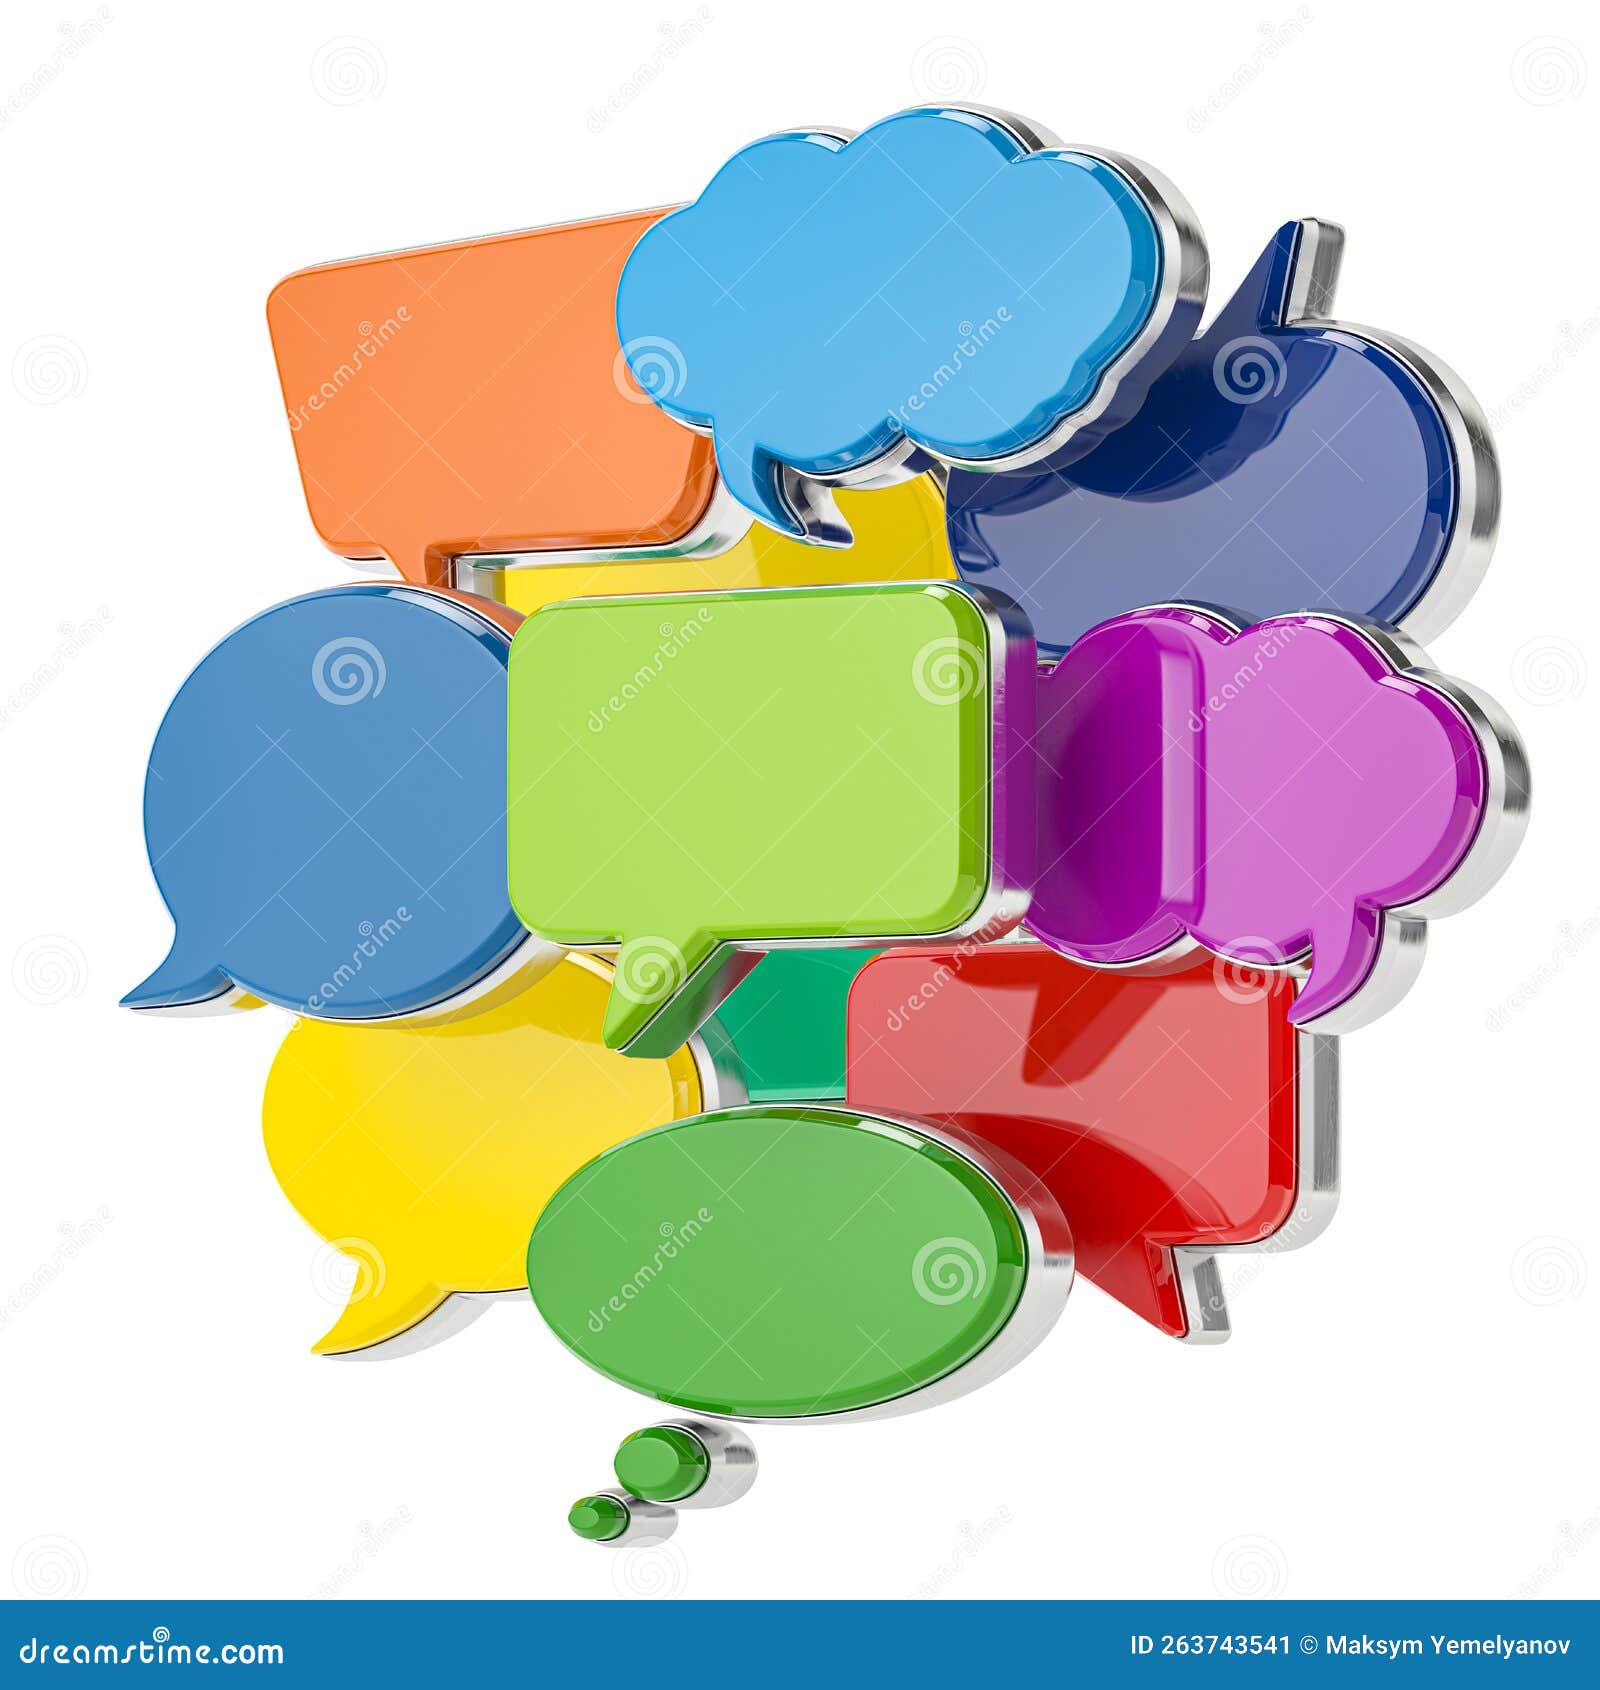 speech bubbles of different forms and coclors  on white